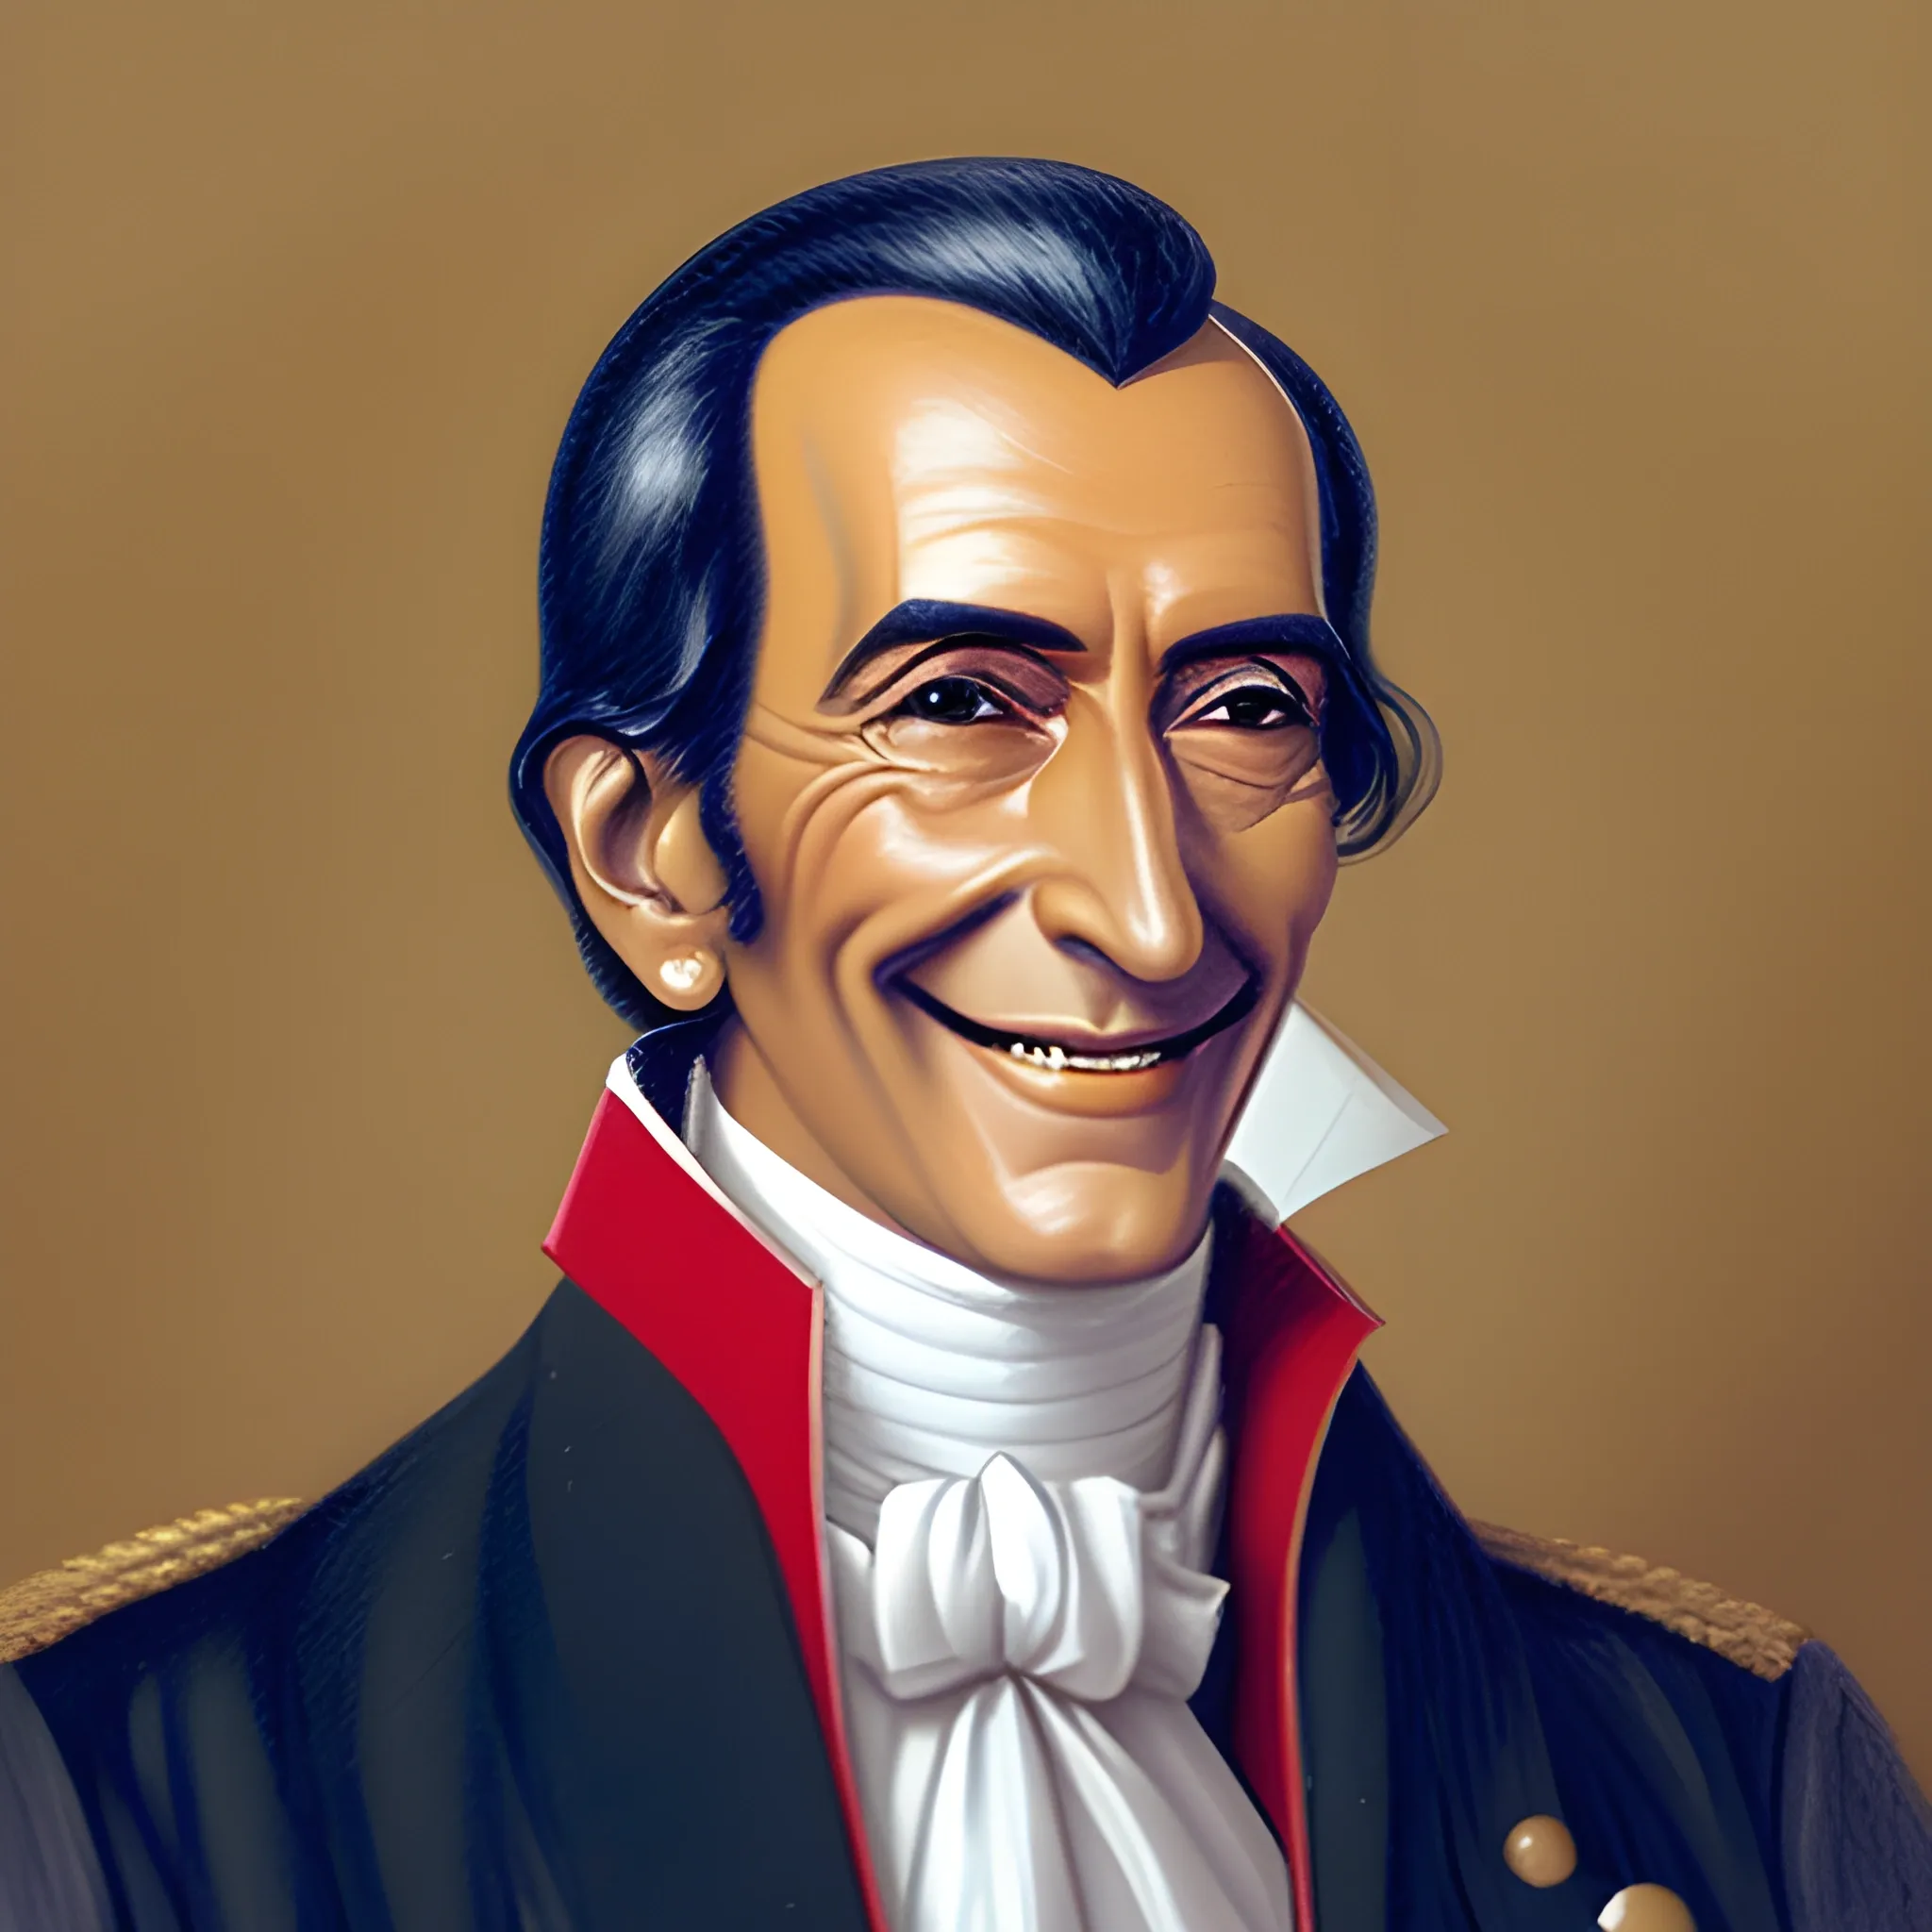 Simon Bolivar smiling at his bithday party, Oil Painting, Pencil Sketch, 3D